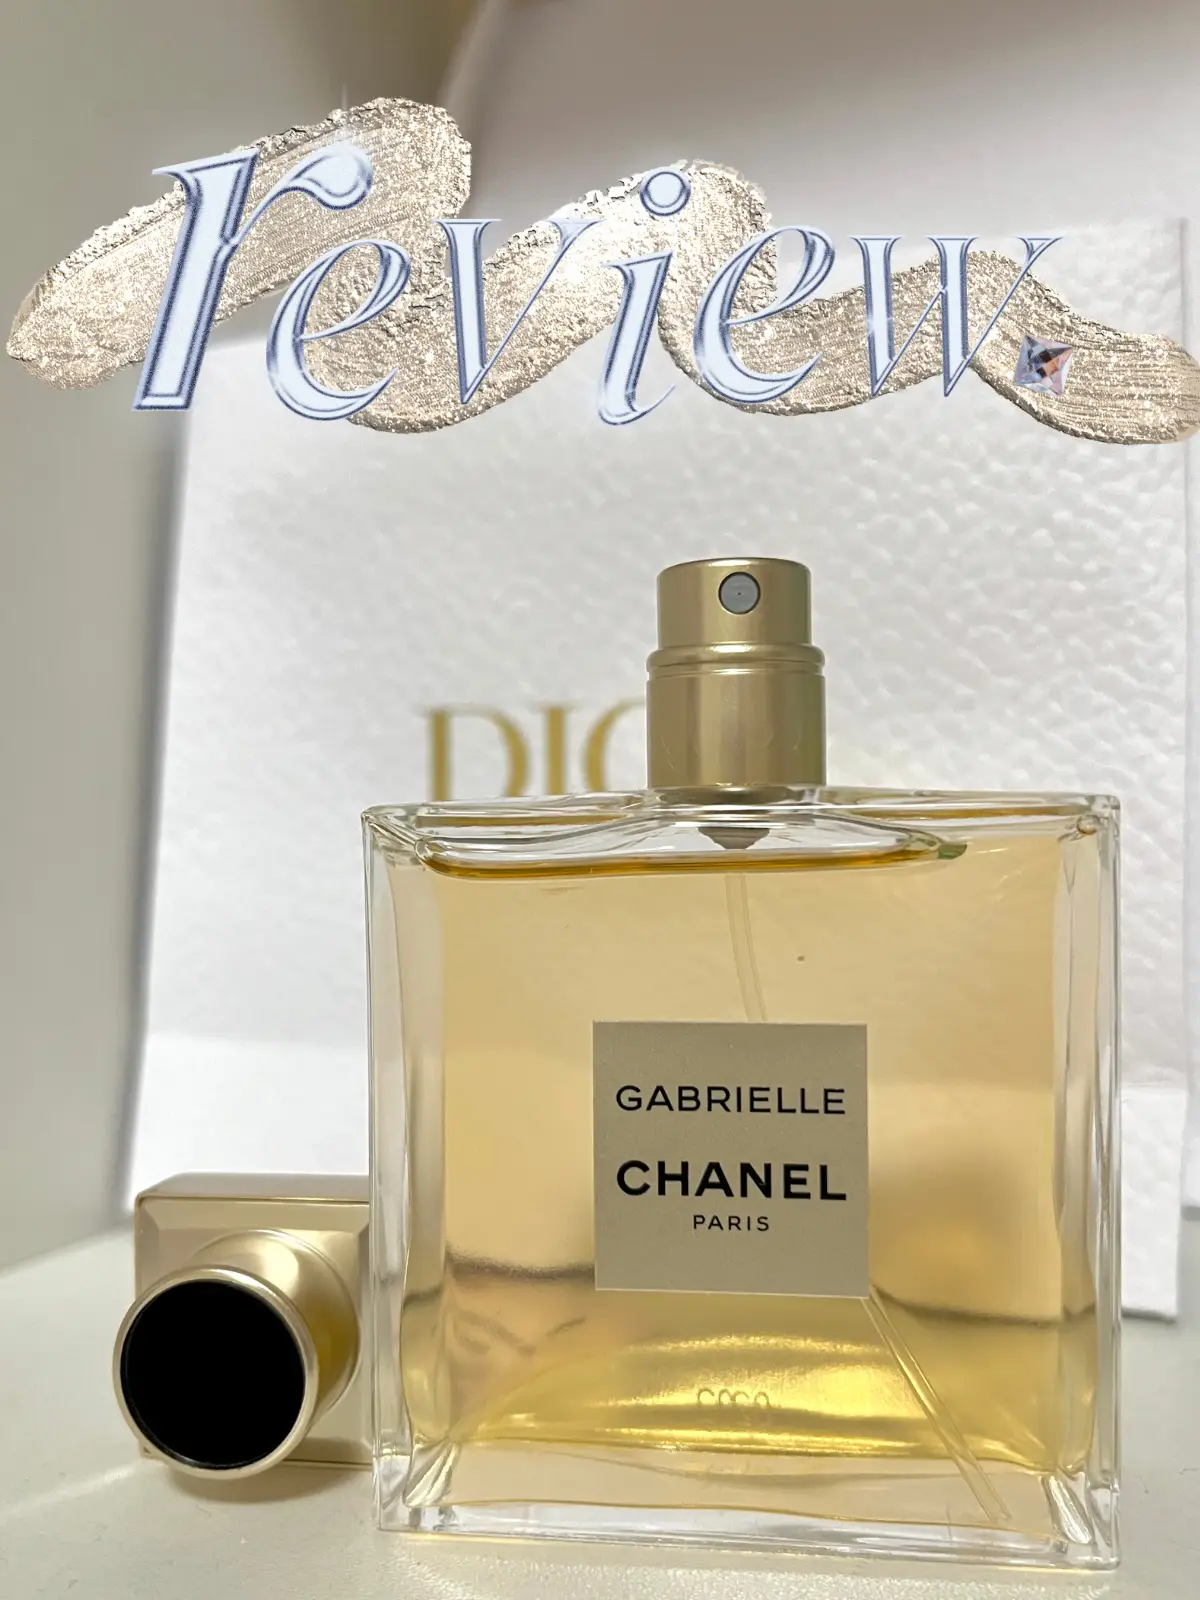 gabrielle chanel perfume review, Elegant scented charming ✨, Gallery  posted by primmymine♡